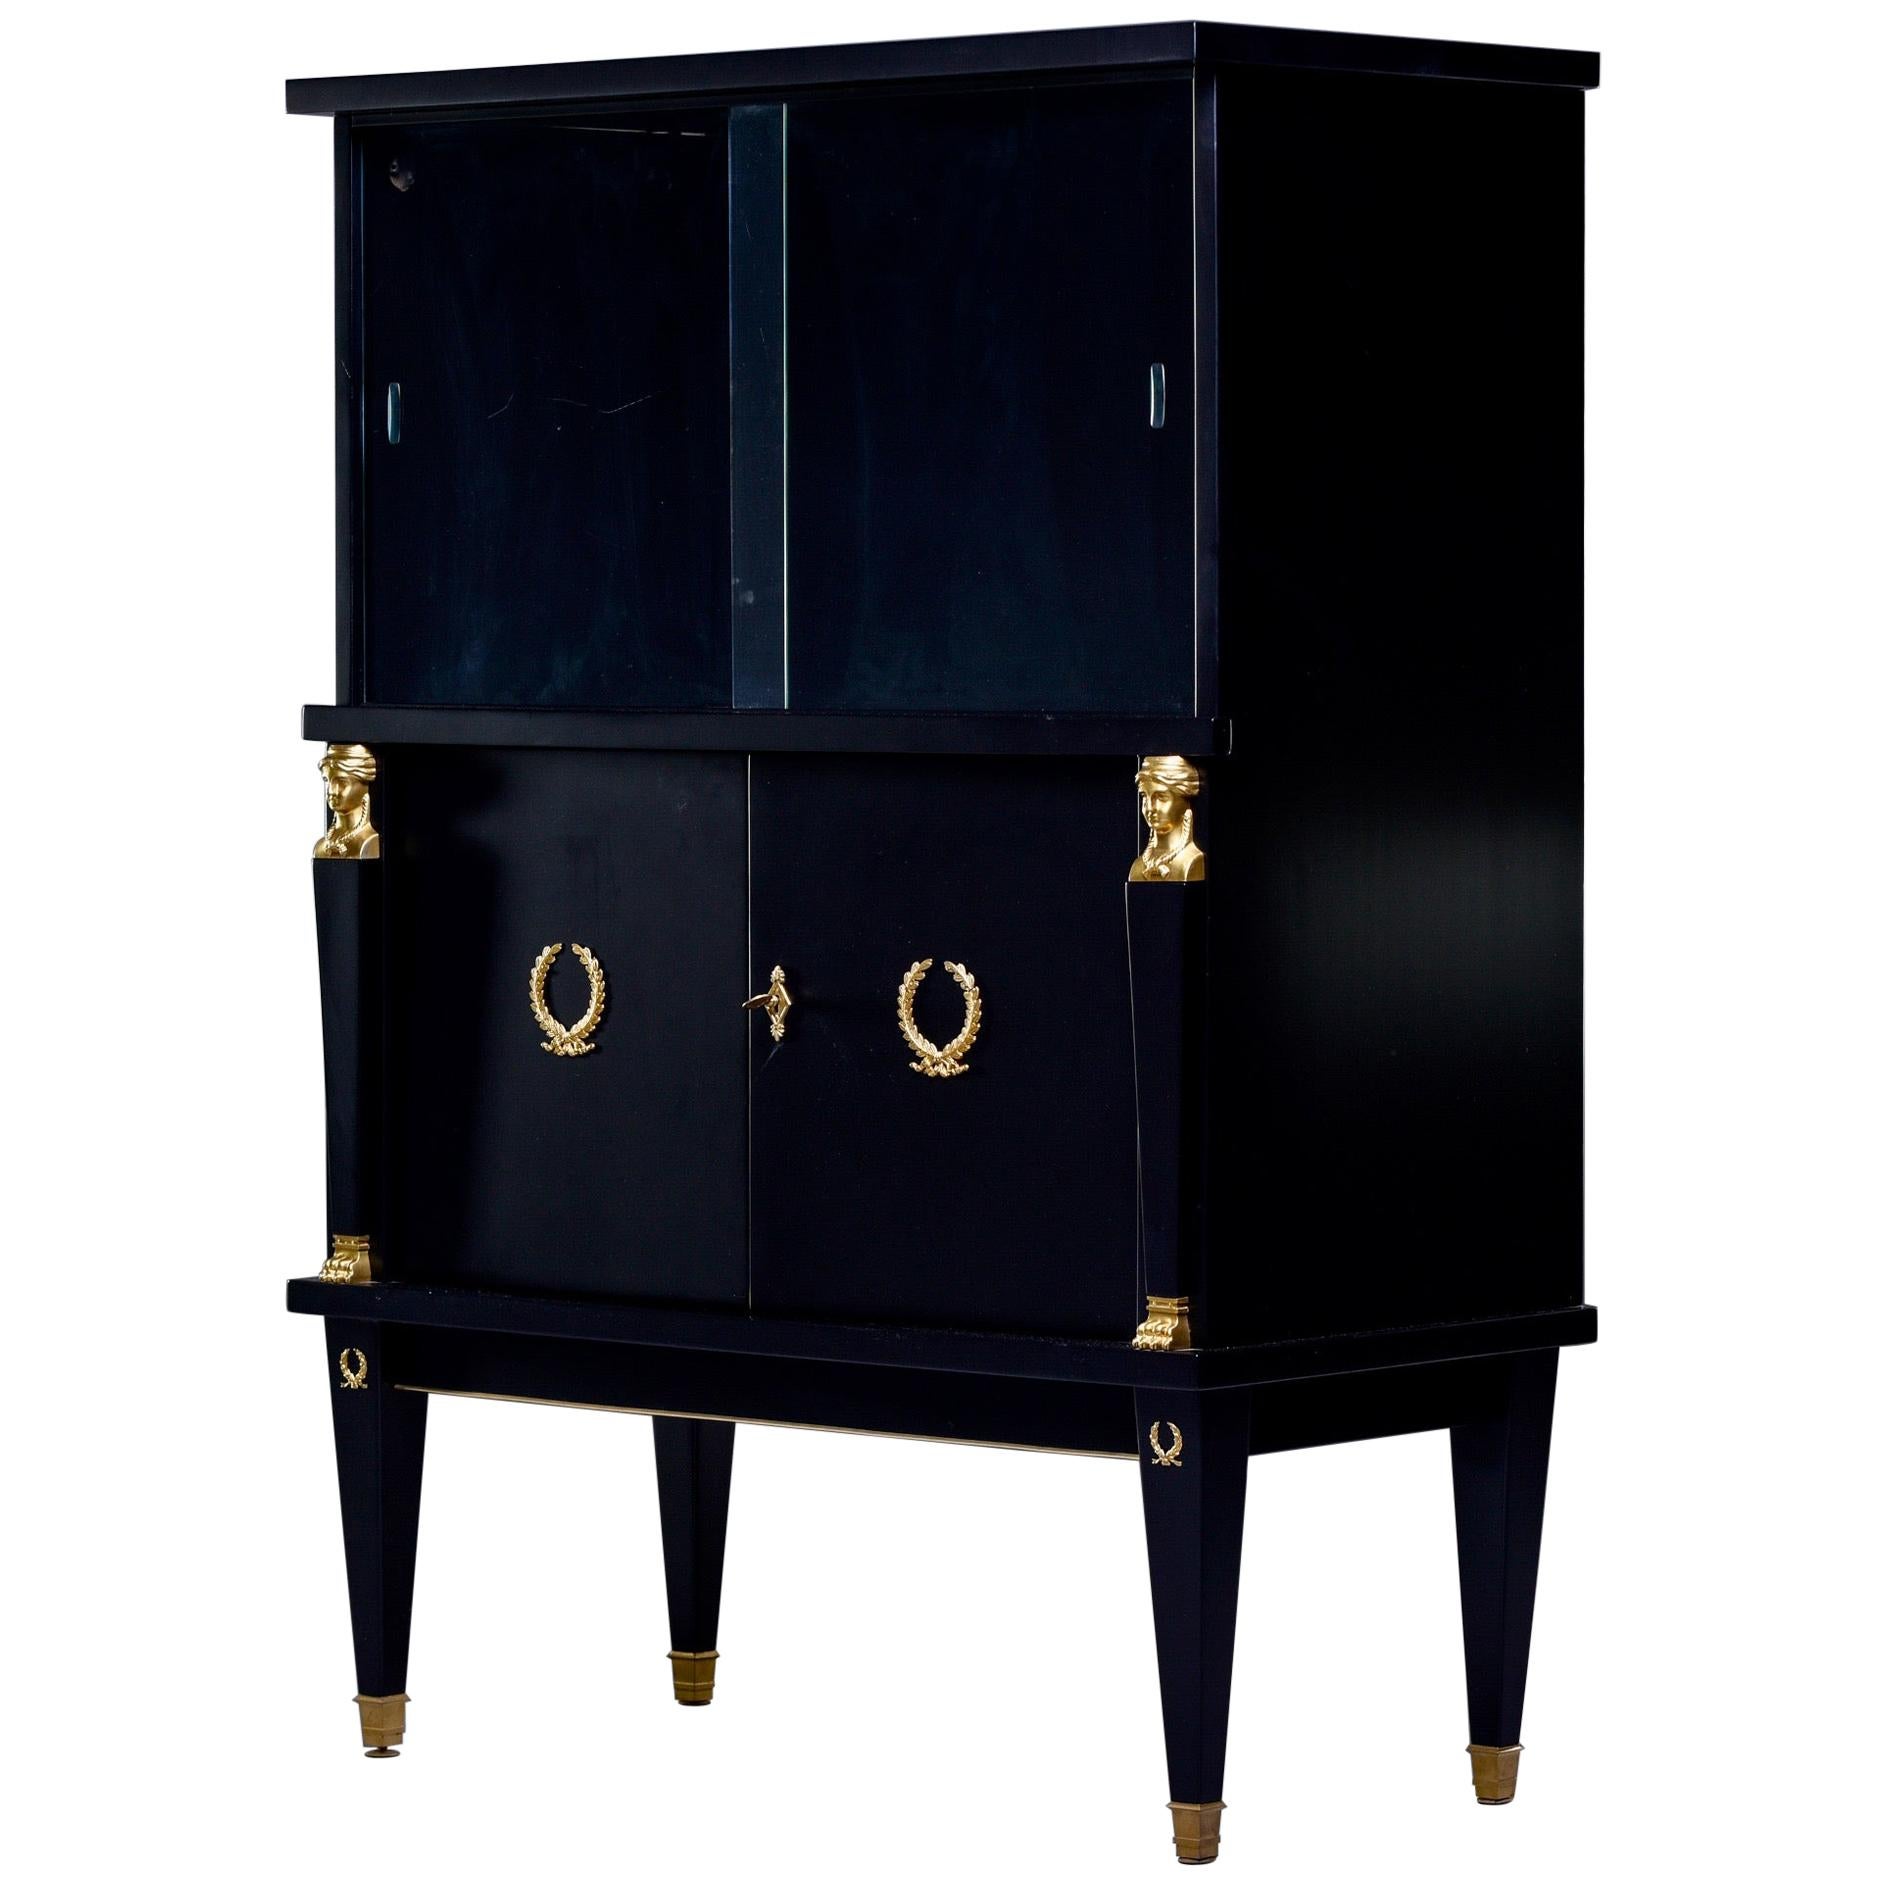 Early 20th Century French Vitrine or Dry Bar with Ebonized Finish and Brass Trim For Sale